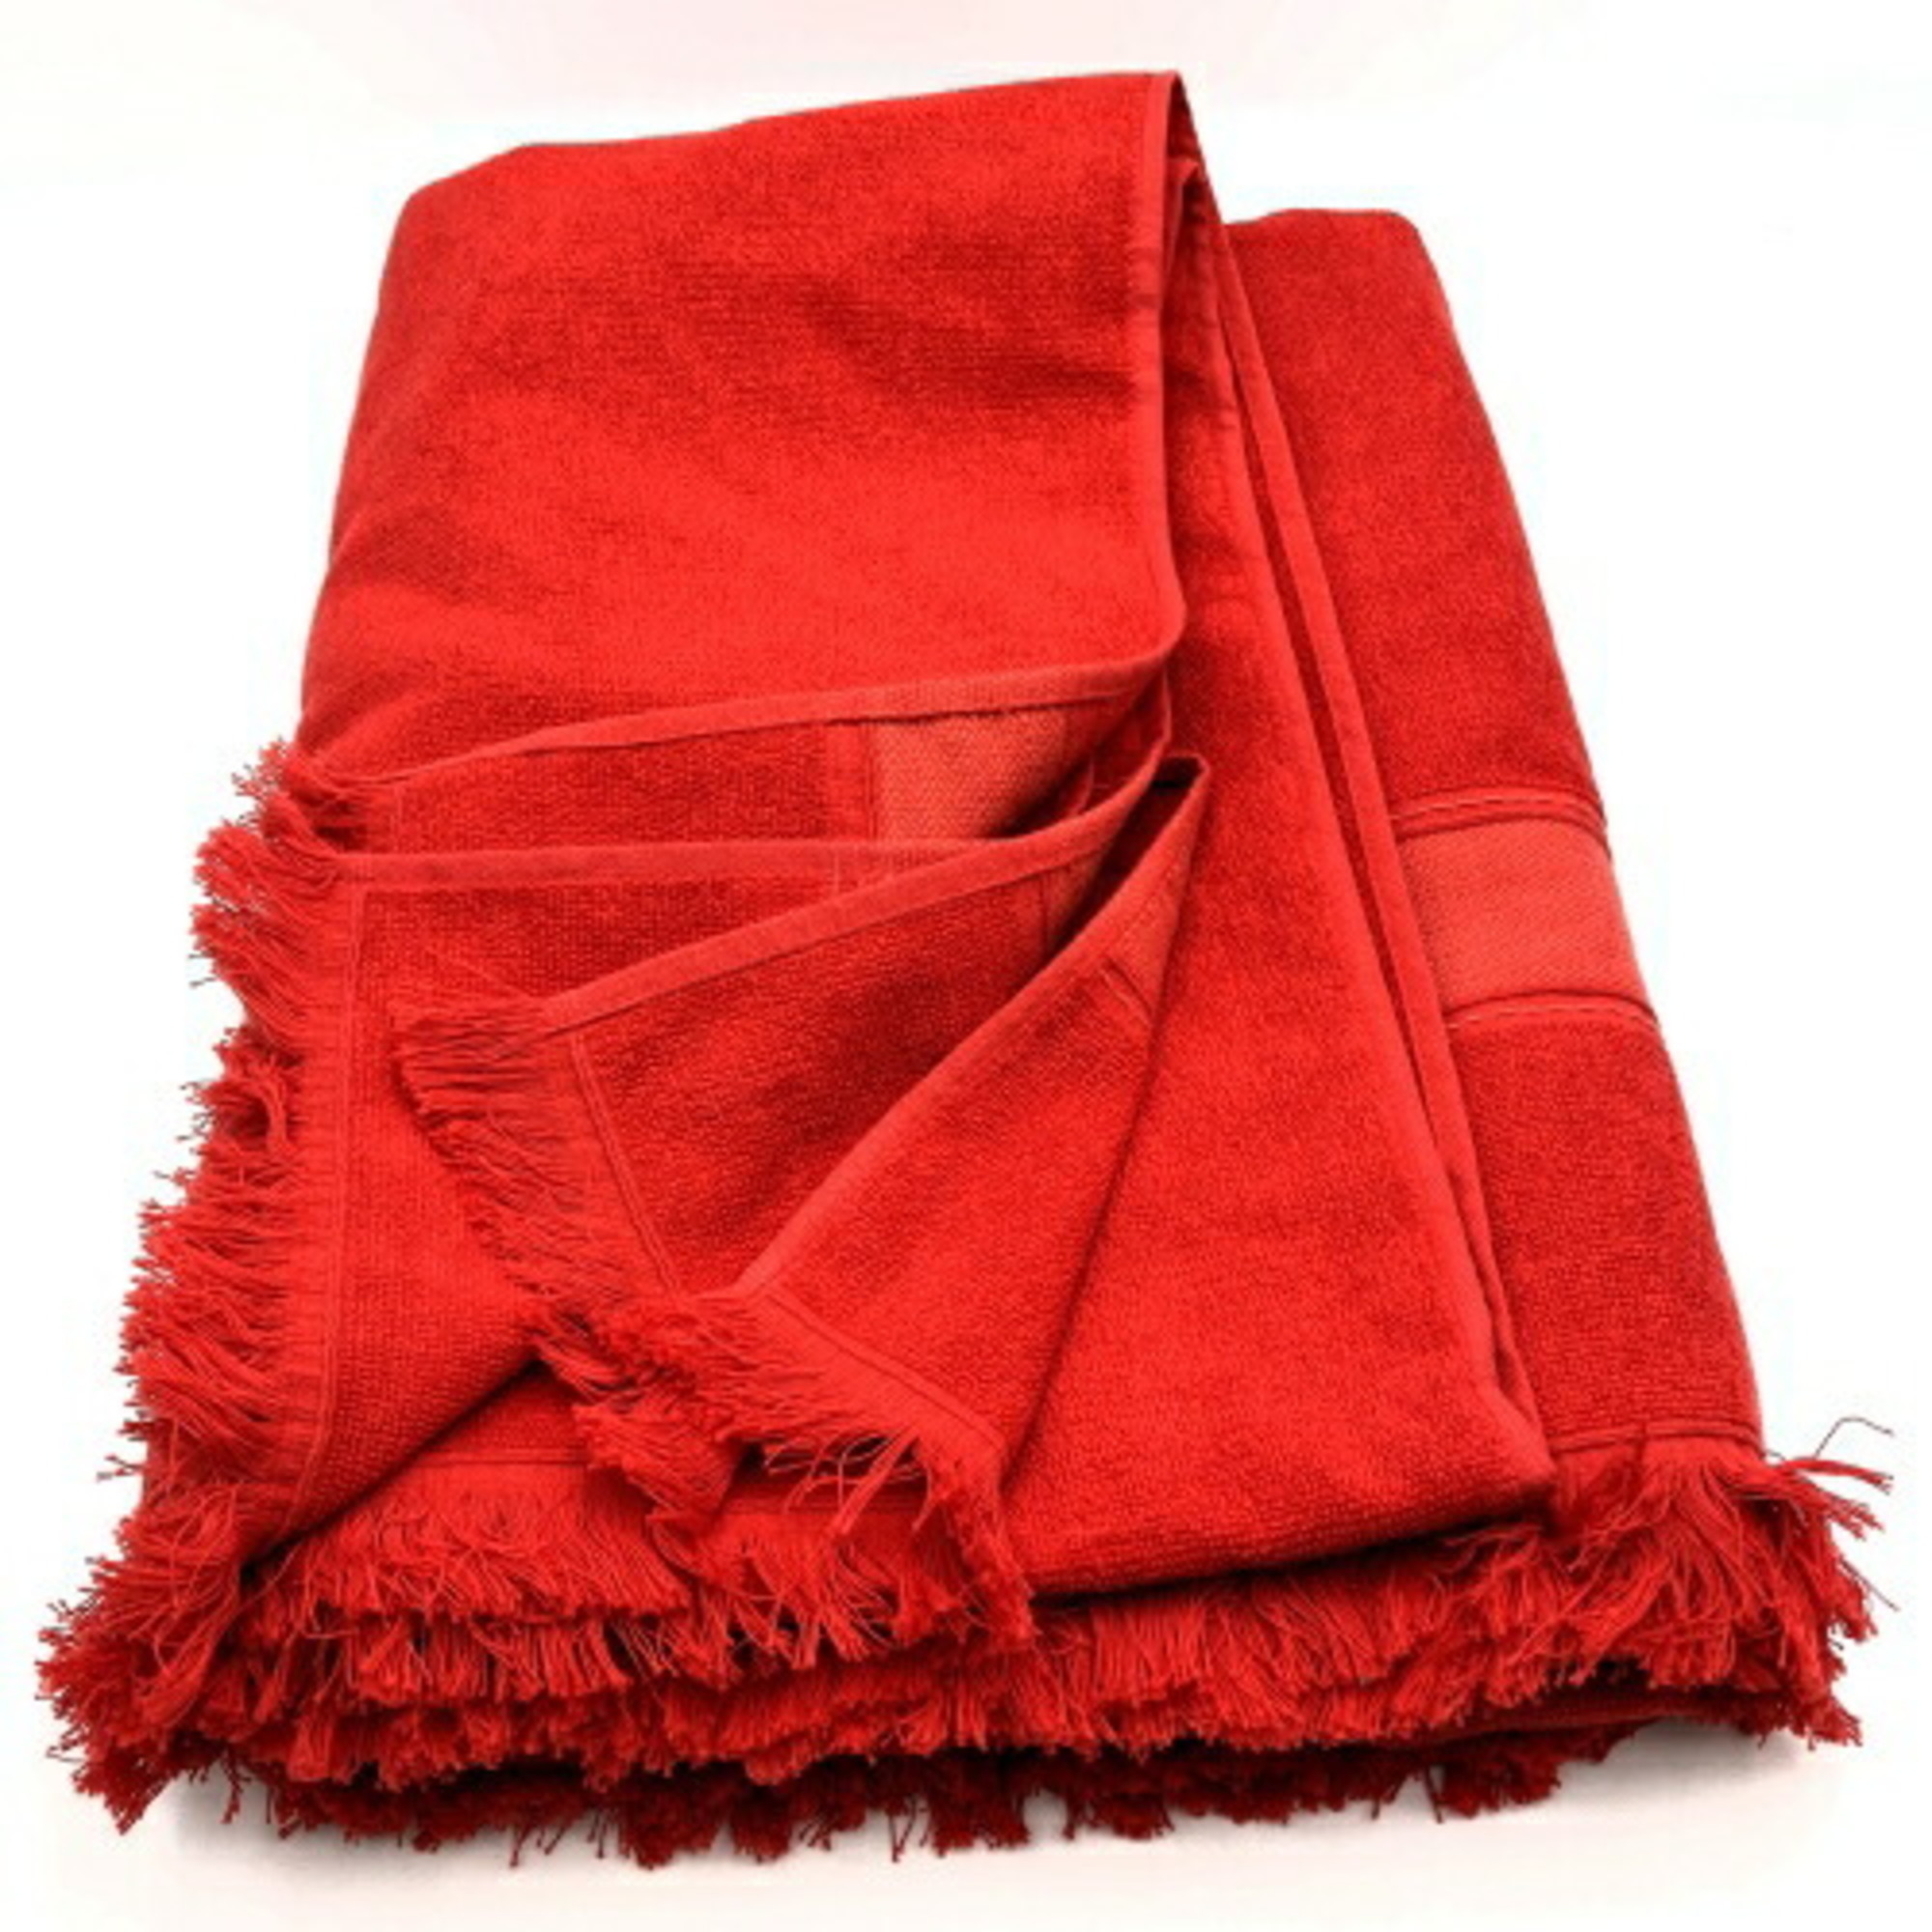 HERMES Blanket Towel Stole Red Cotton Women's Men's Accessories Fashion USED ITKYHW0WHBHS